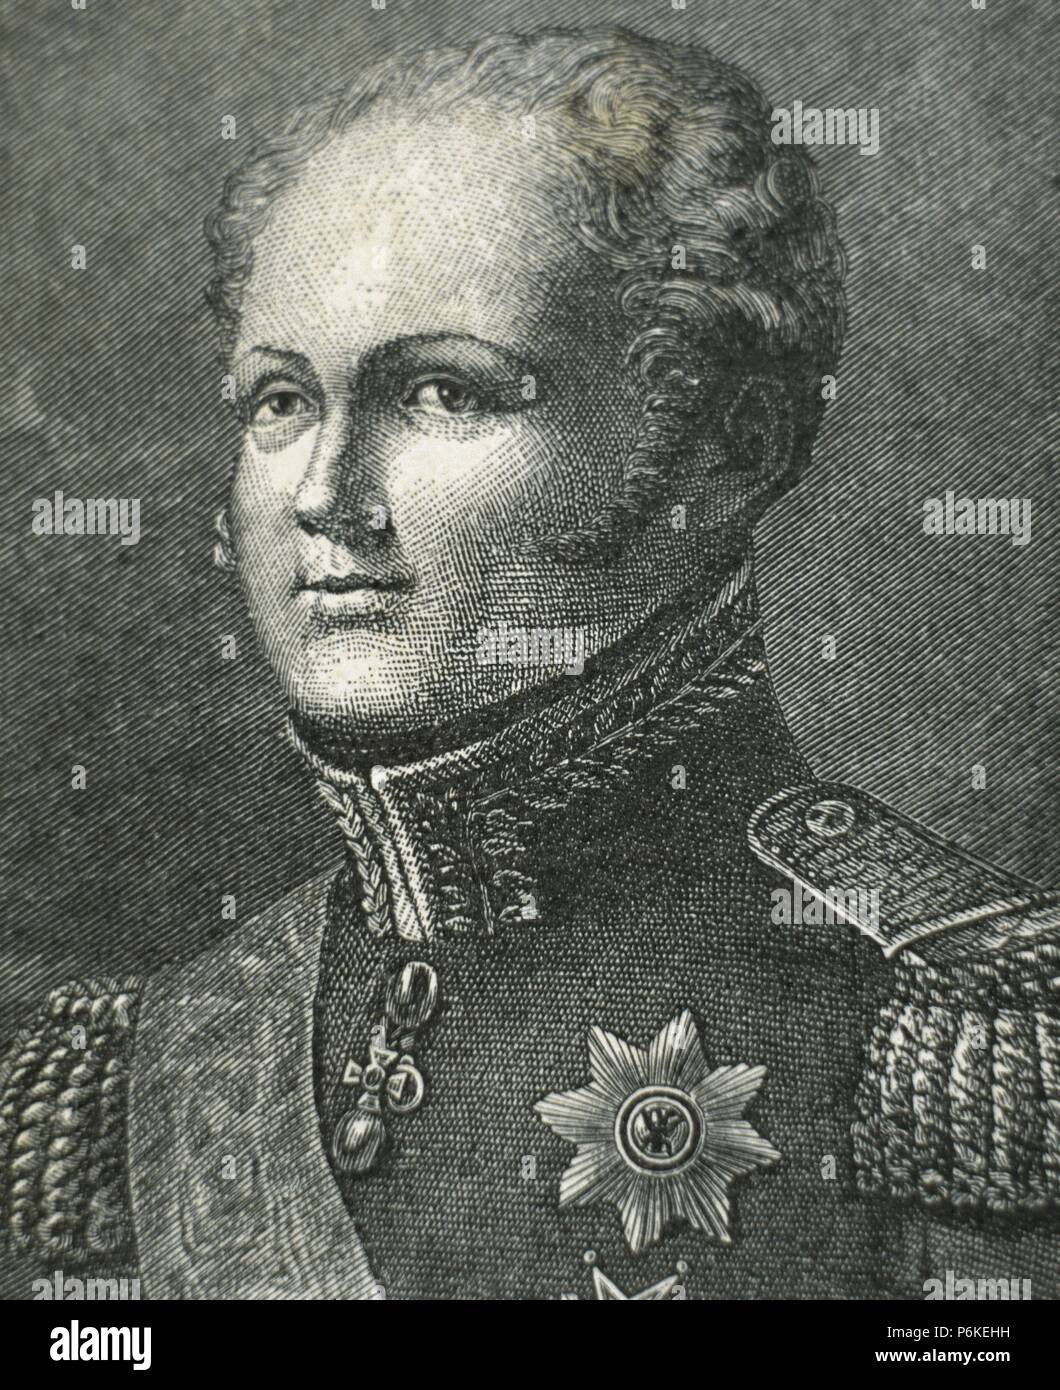 Alexander I of Rusia (1777-1825). Emperor of Russia (1801-1825), the first King of Poland (1815-1825) and the first Russian Grand Duke of Finland. Portrait. engraving. 19th century. Stock Photo